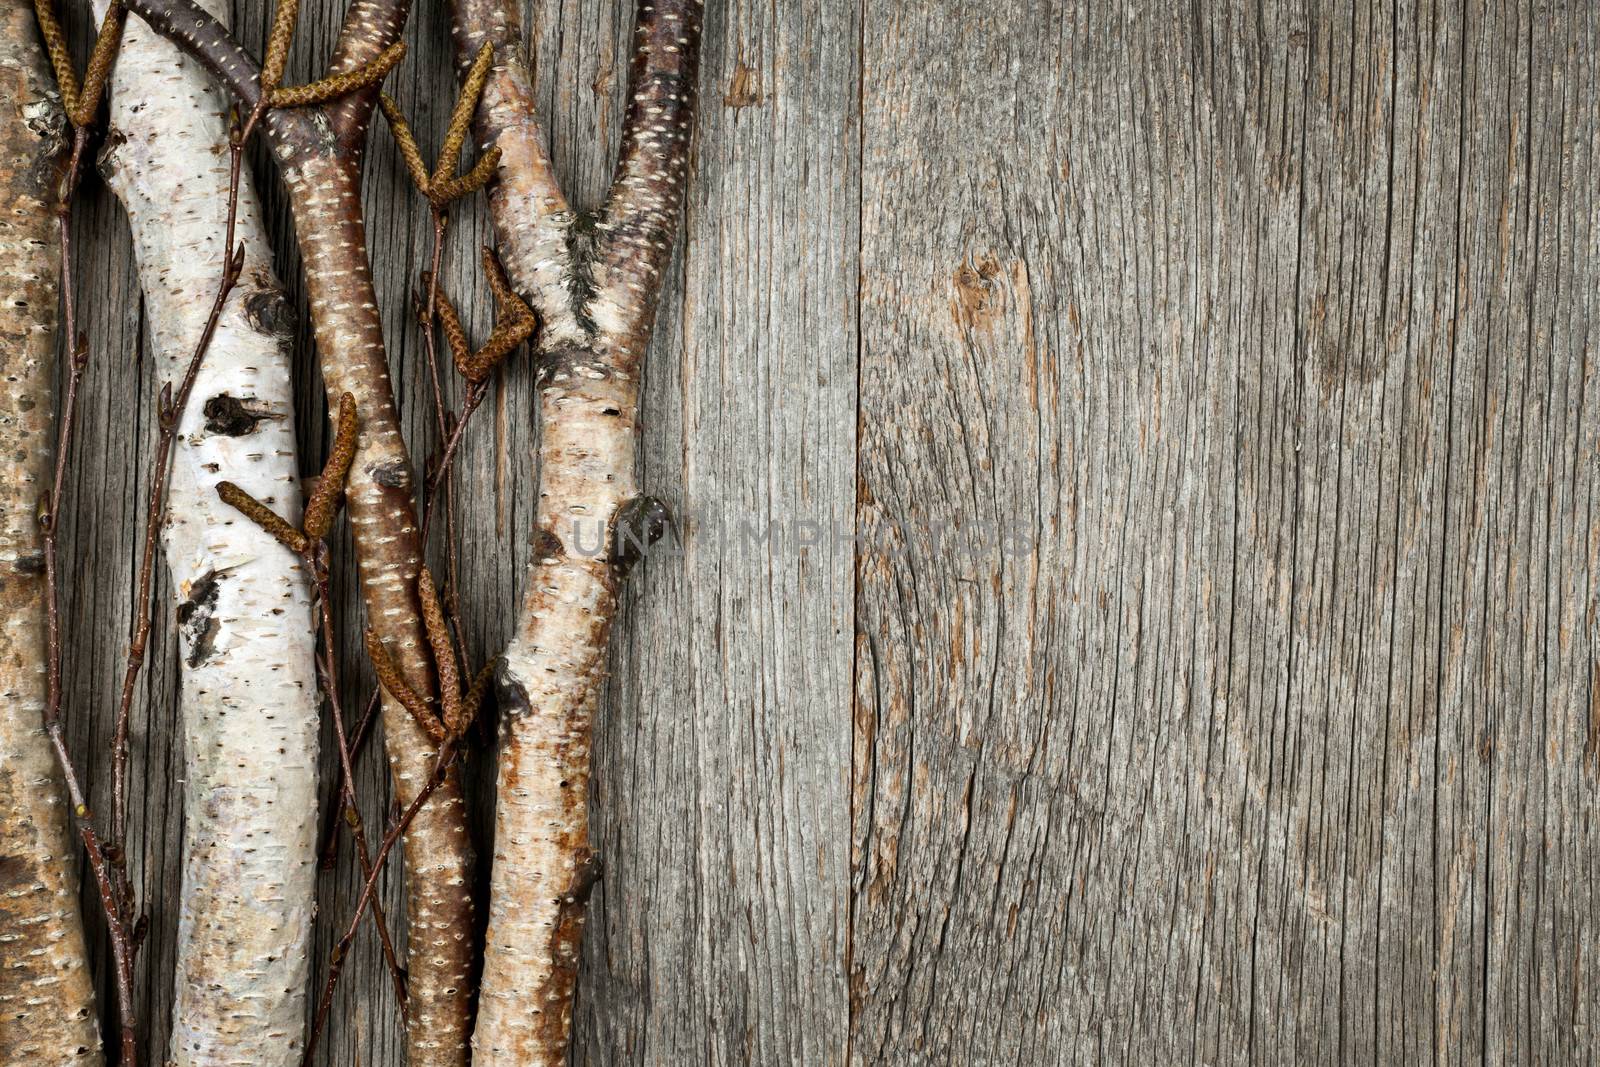 Birch tree trunks and branches on natural wood background with copy space